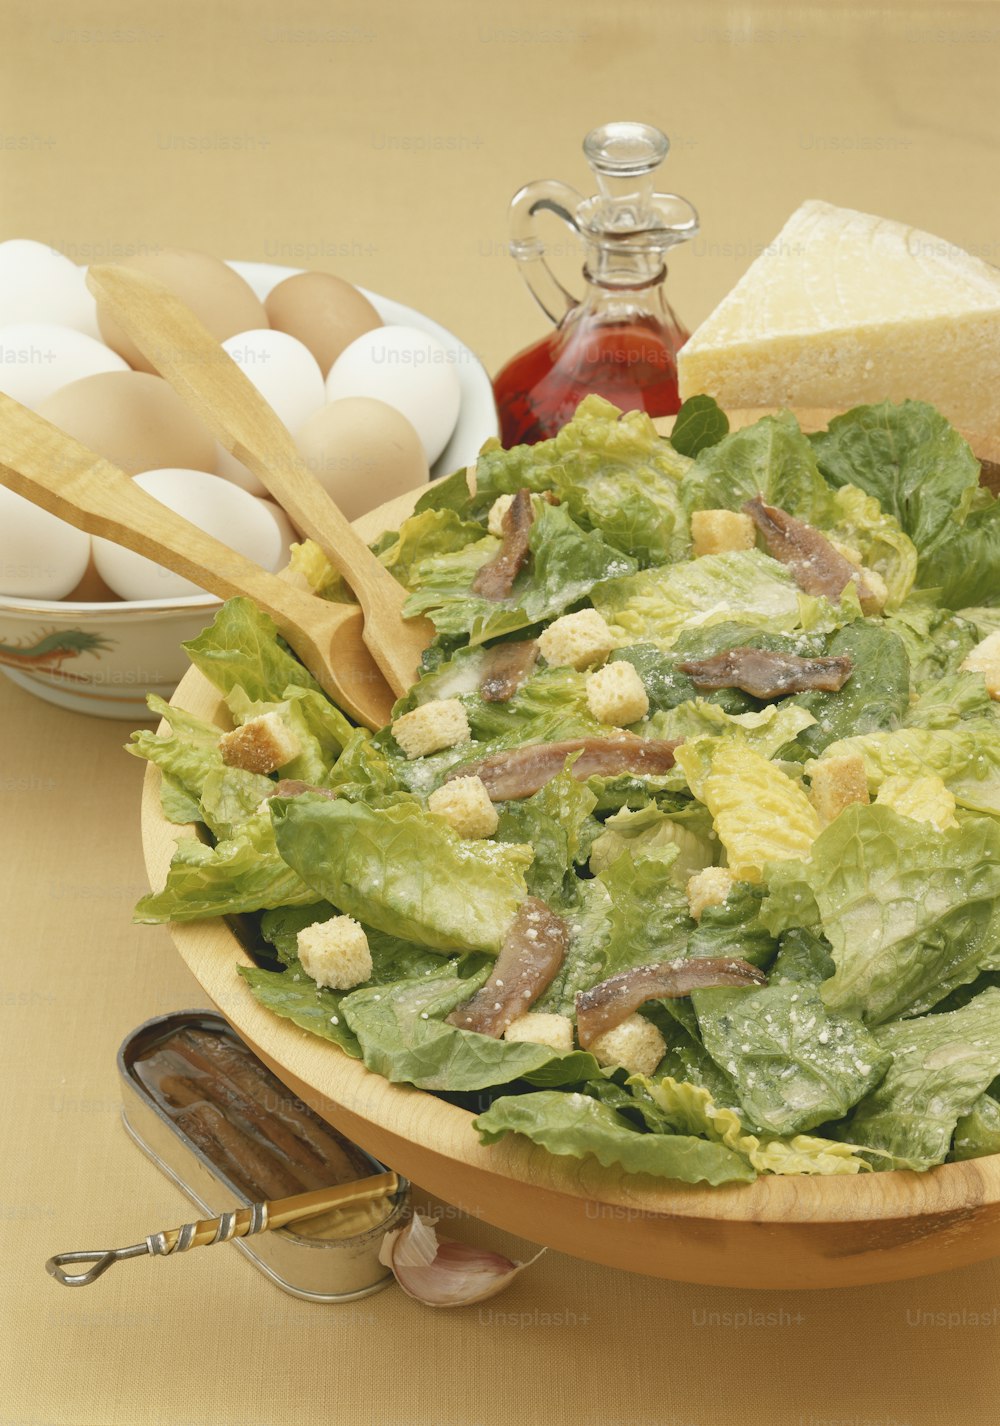 a wooden bowl filled with lettuce next to eggs